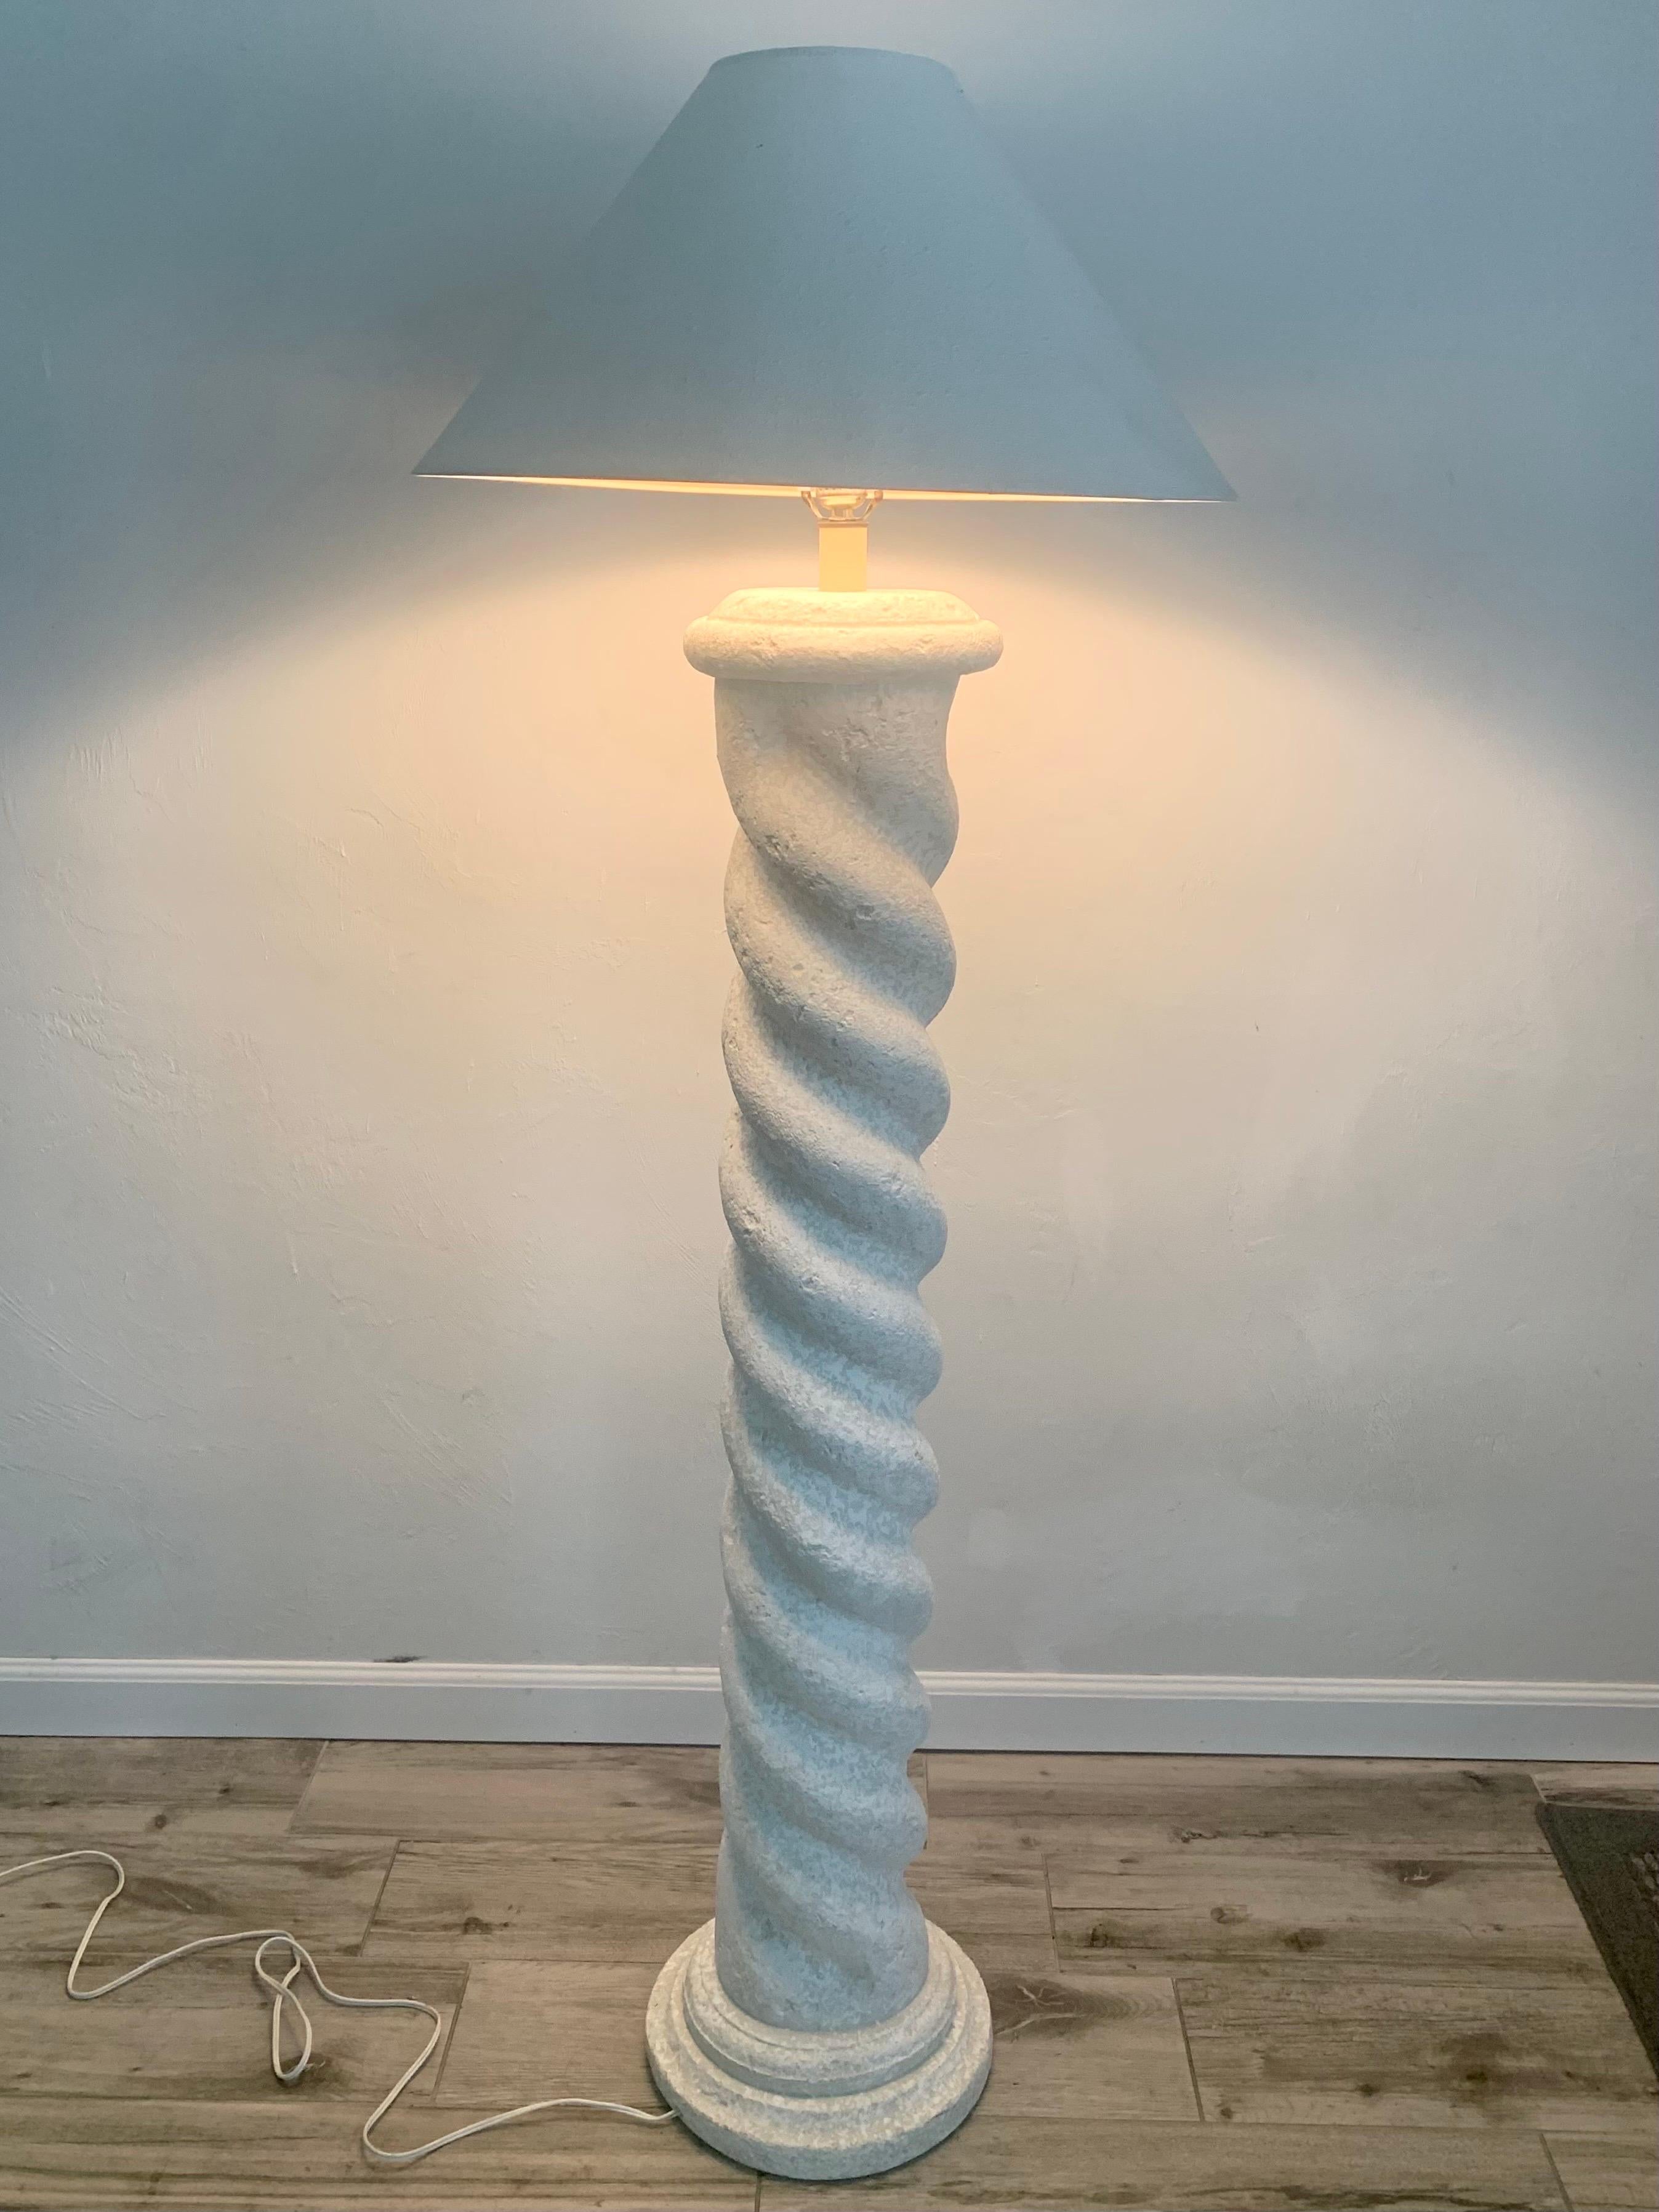 Sculptural plaster floor lamp in the style of Michael Taylor. Sporting a spiral column design with a round base. Textured plaster offered and organic elegance reminiscent of white washed stone or unfilled travertine. 

Lamp is 59” tall with a base